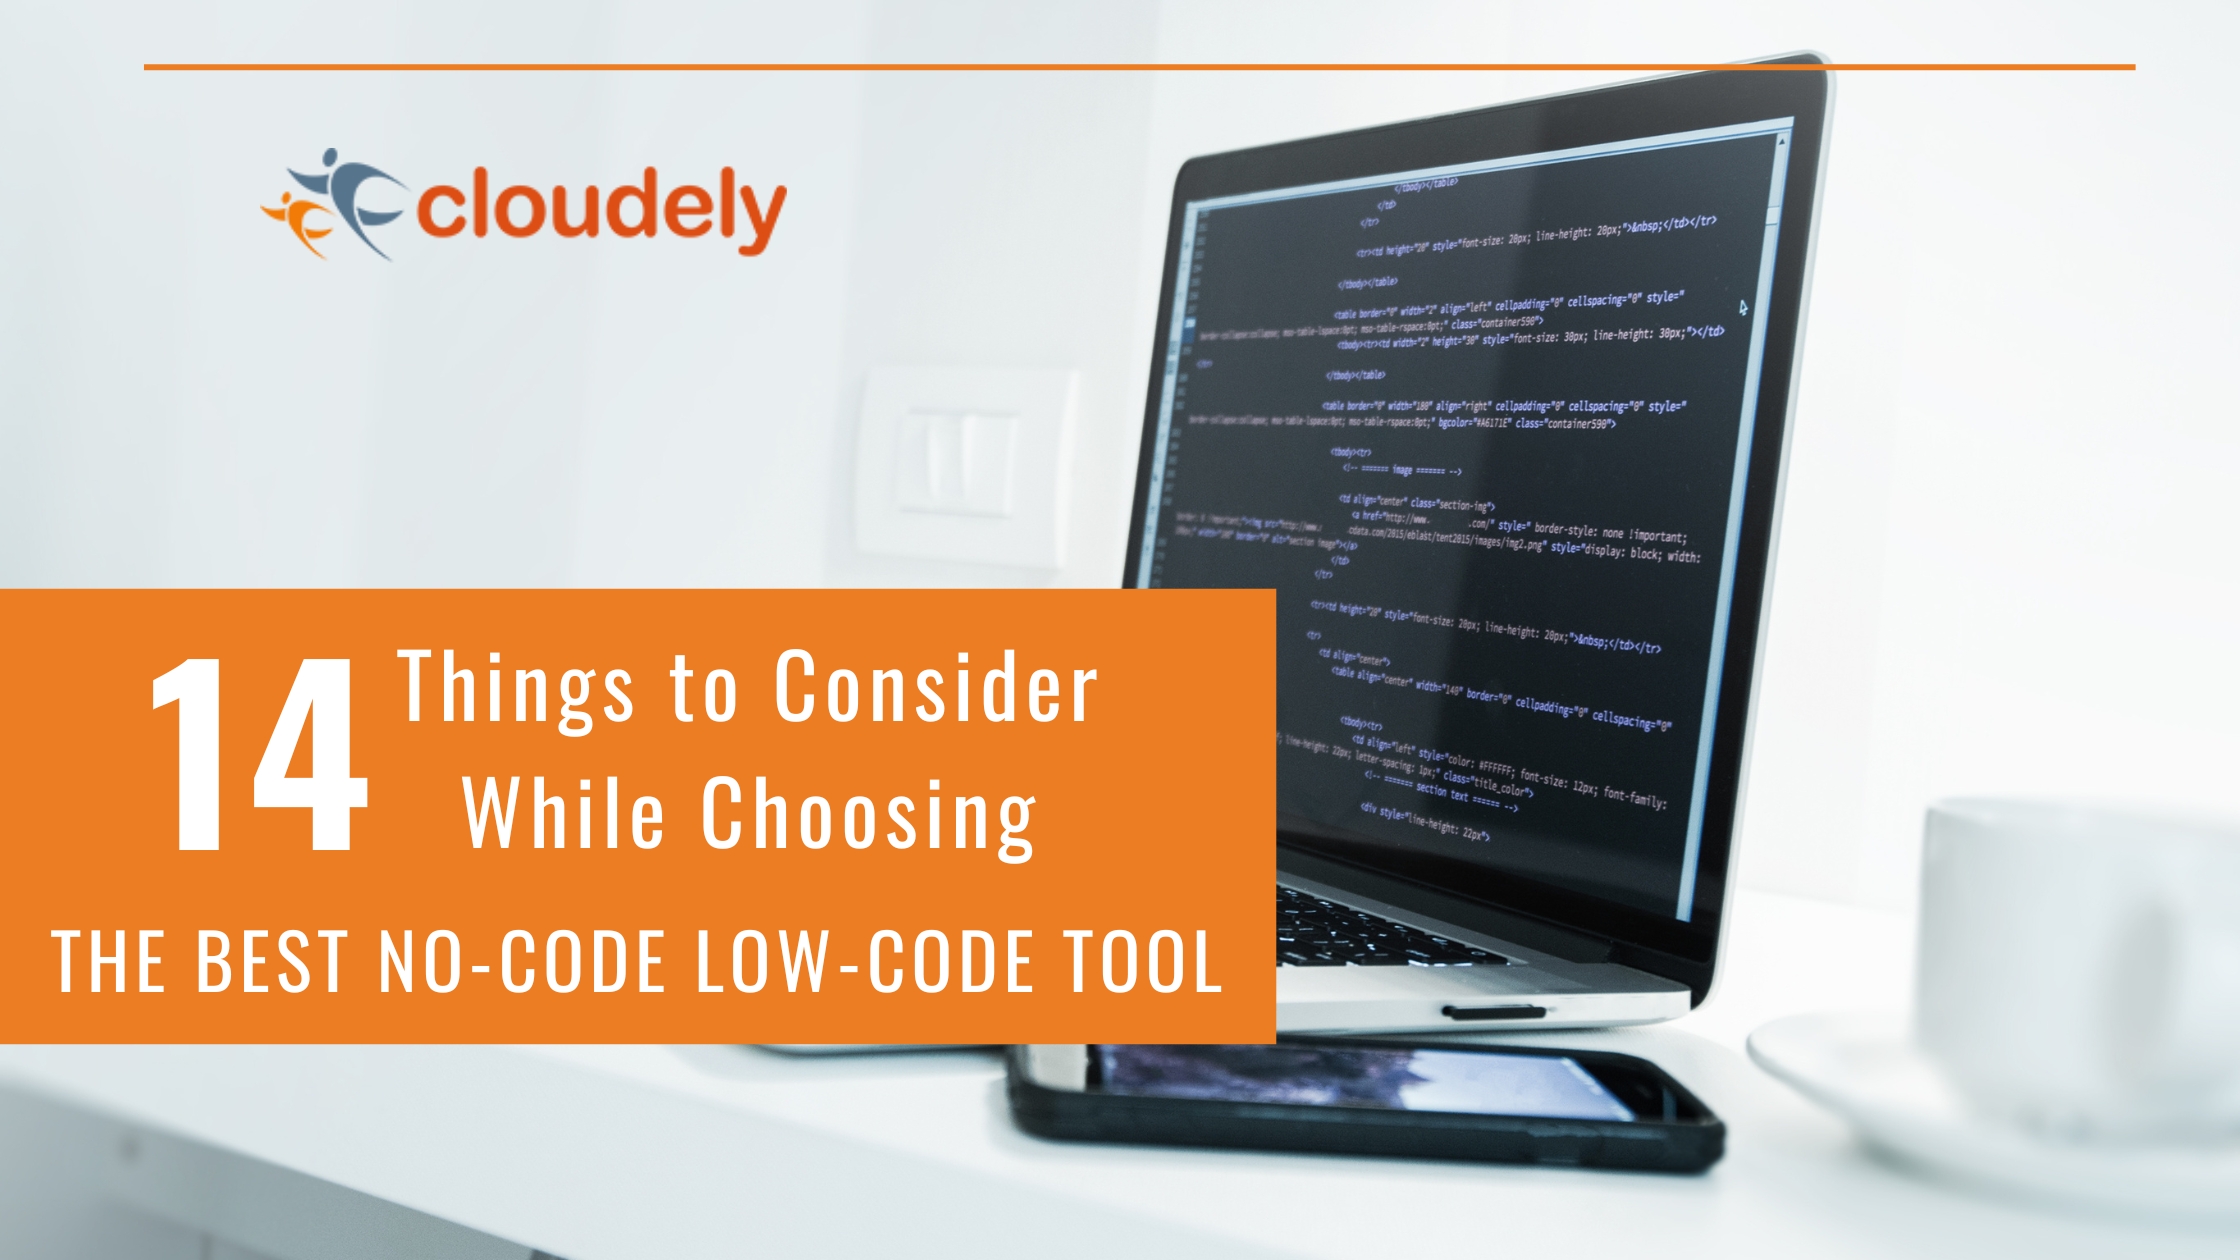 14 things to consider while choosing the Best No-Code Low-Code Tool